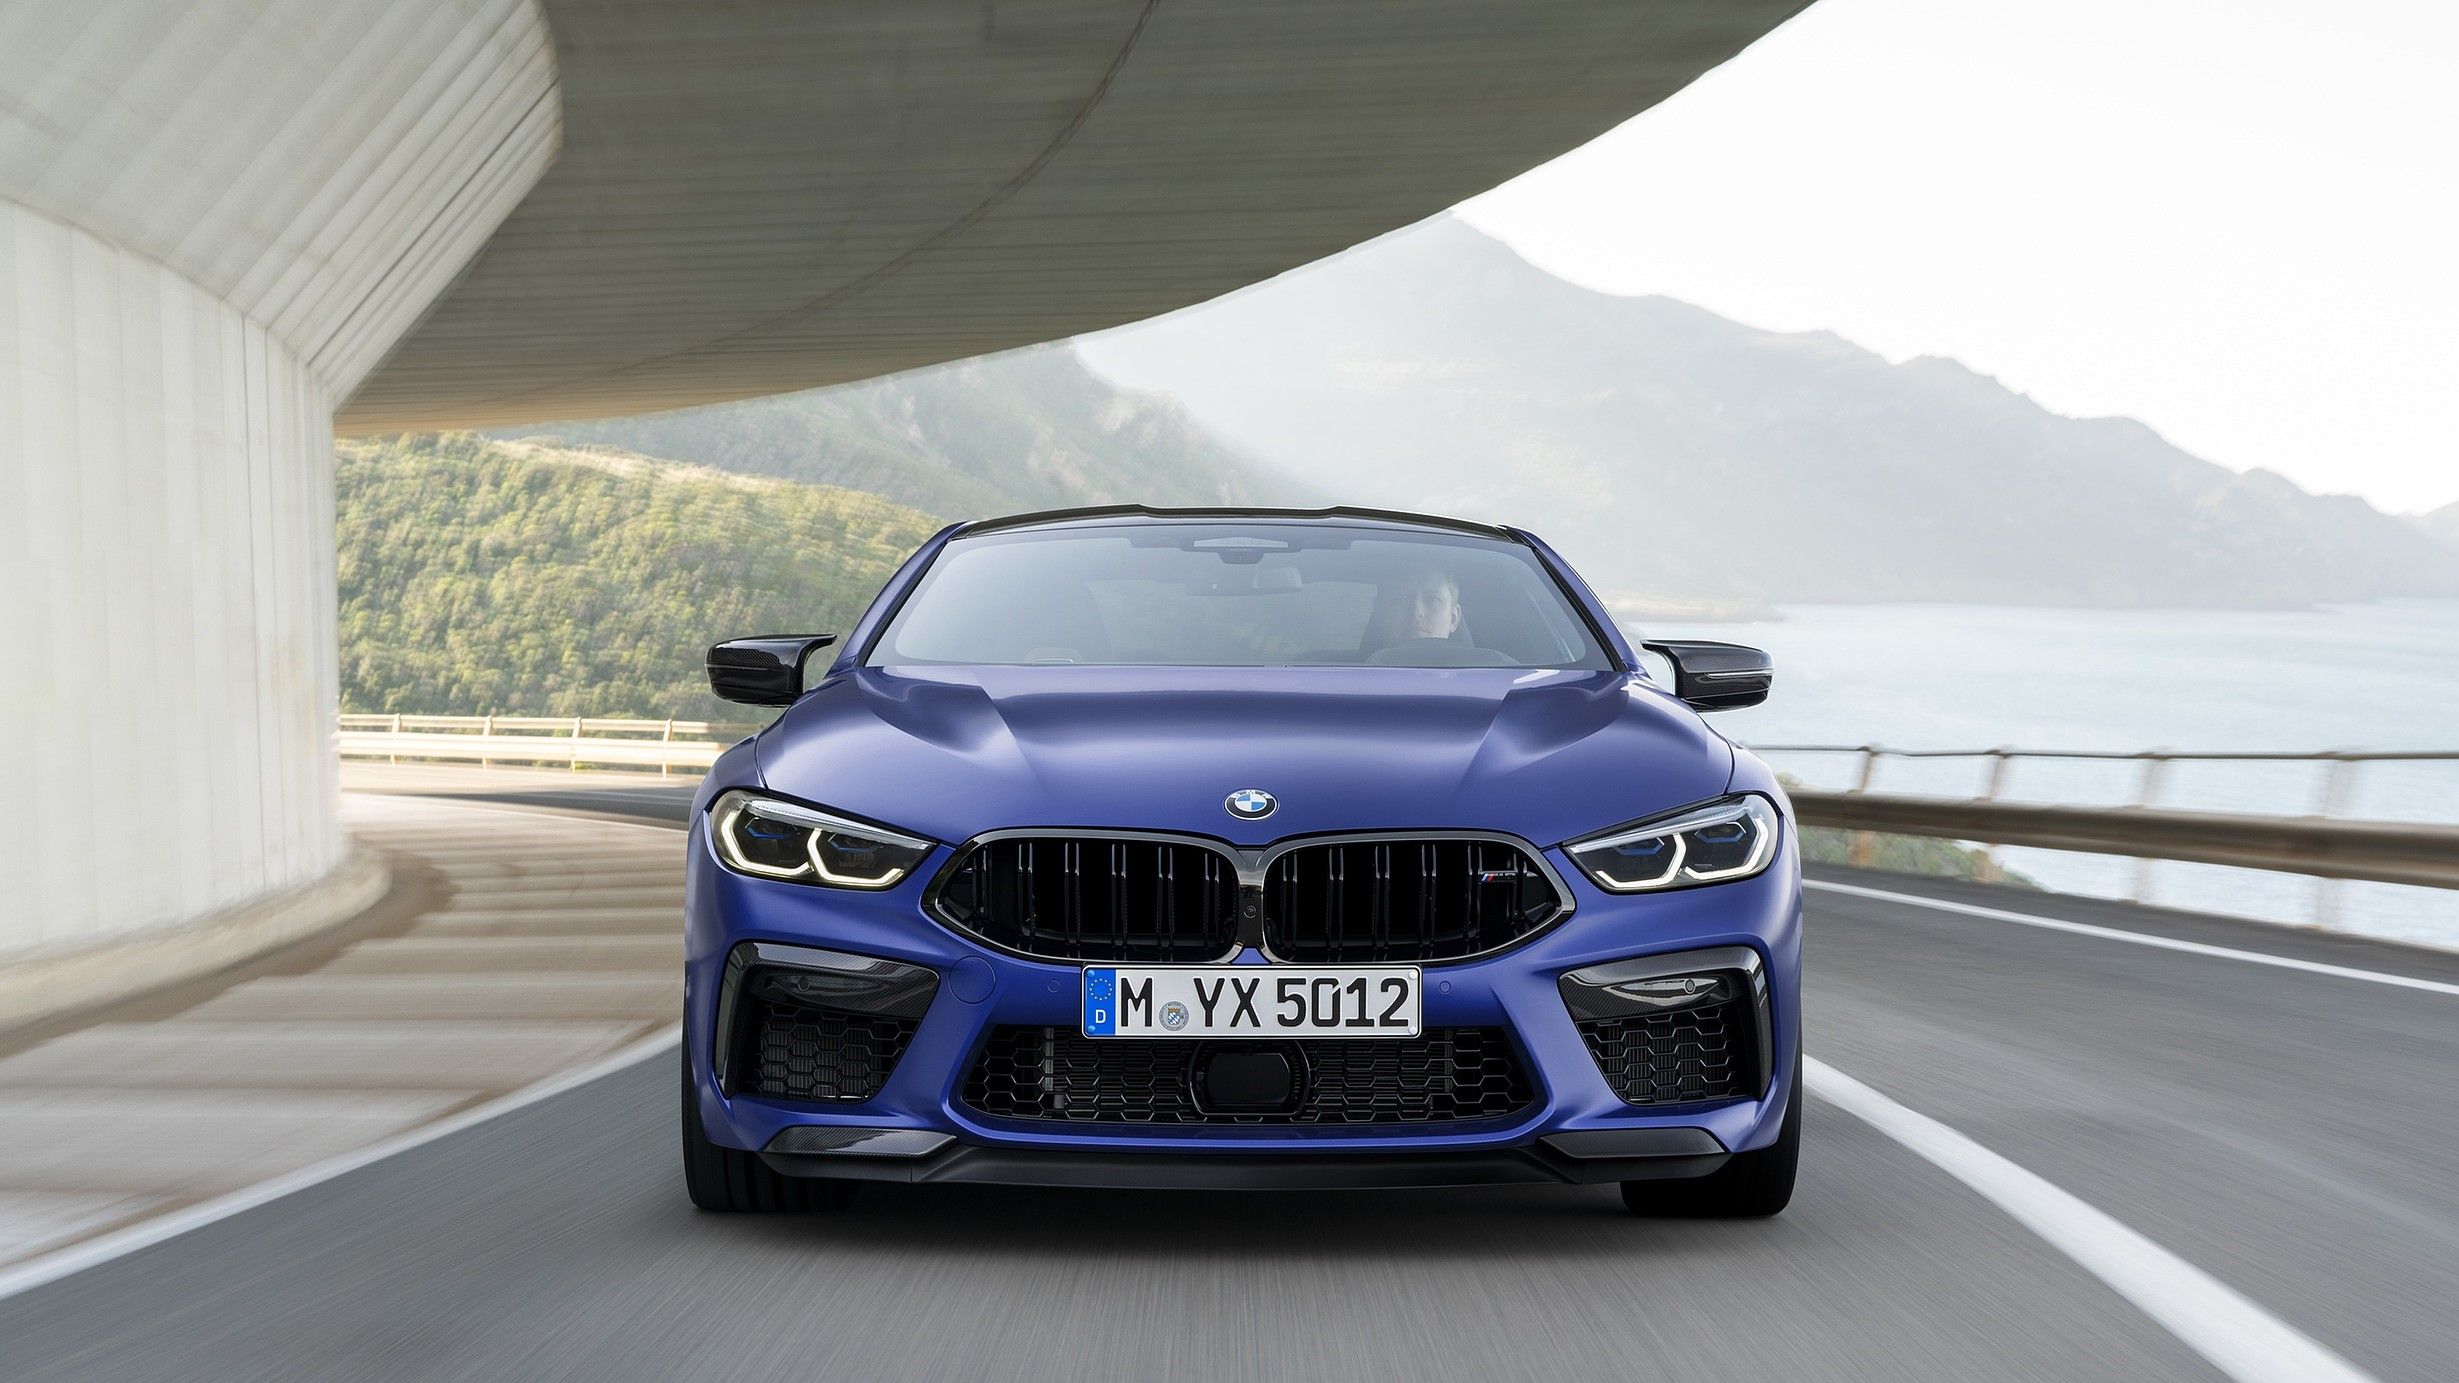 2021 BMW M8 review: Trims, Features, Price, Performance, MPG Figures, And Rivals